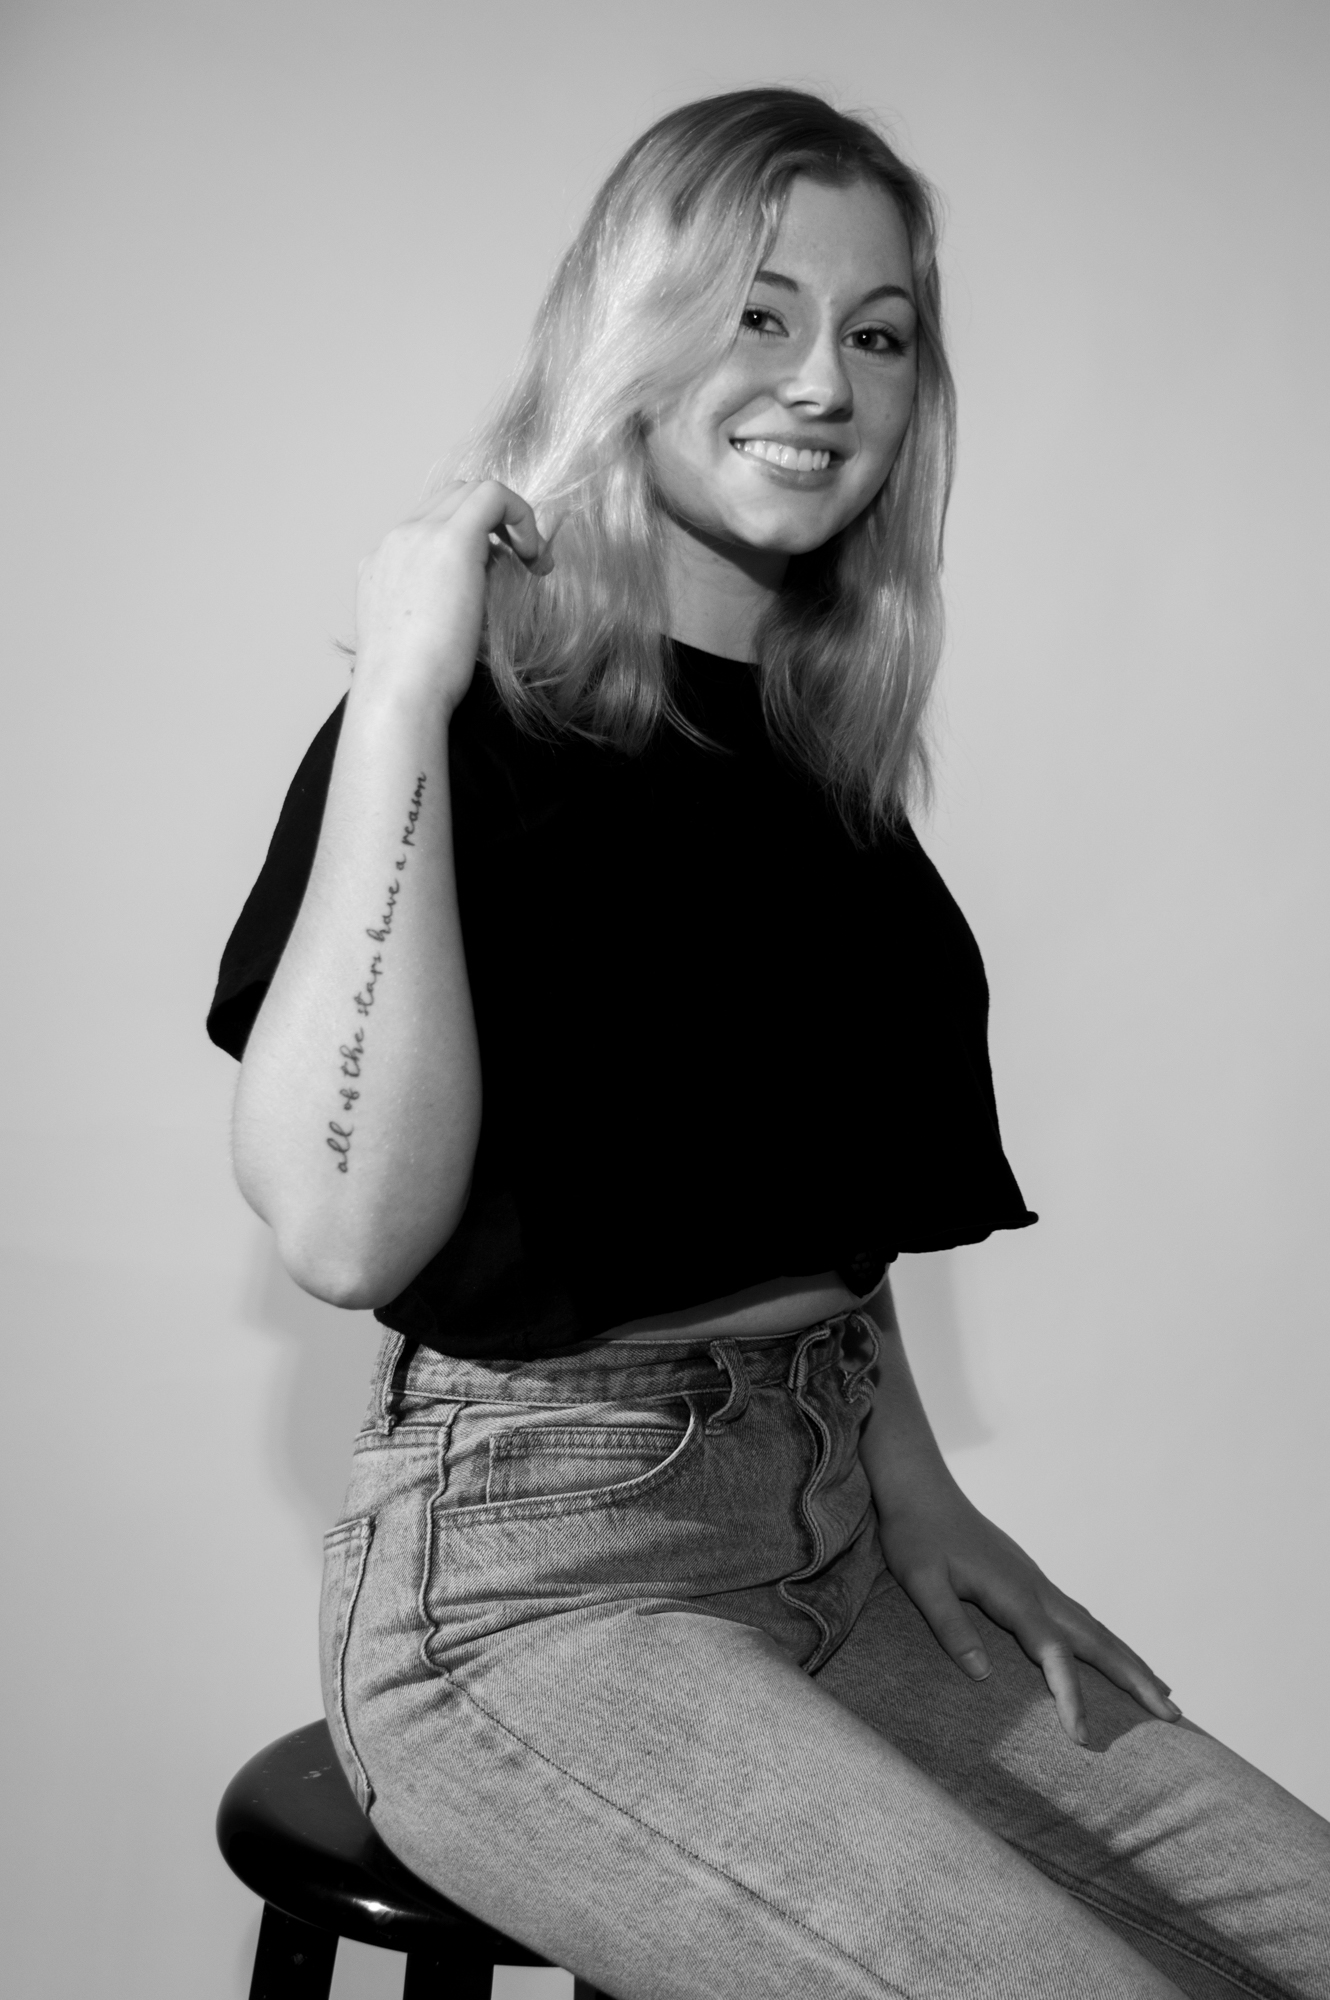 black and white image of a blond, white female sitting on a stool with a scripted tattoo on her forearm